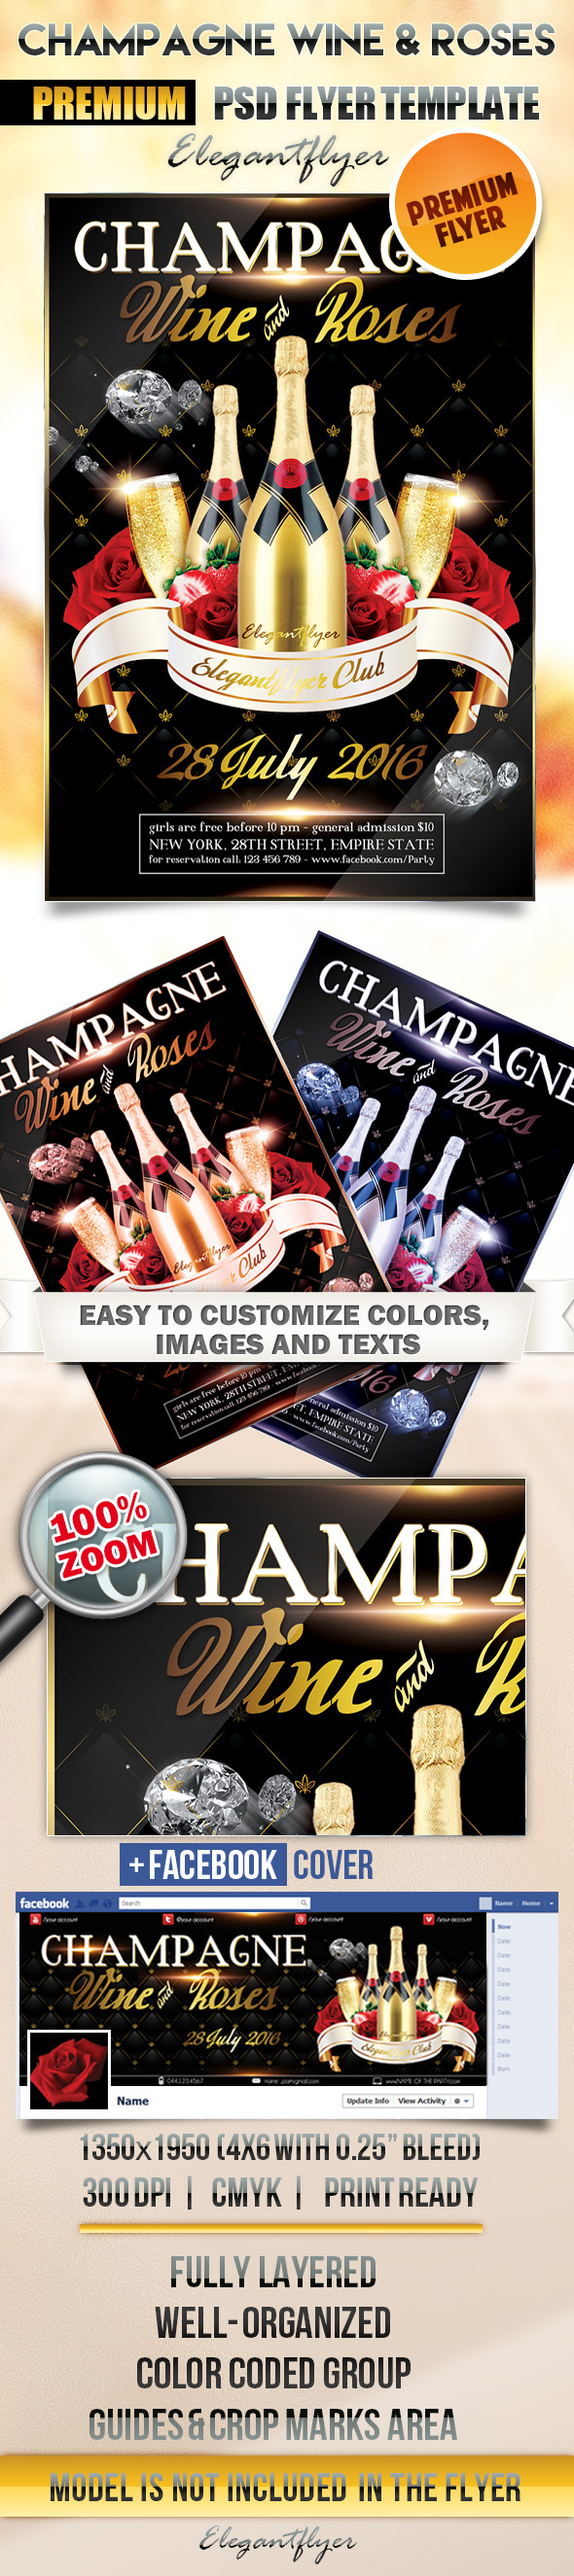 14 Wine Brochure Templates PSD Images